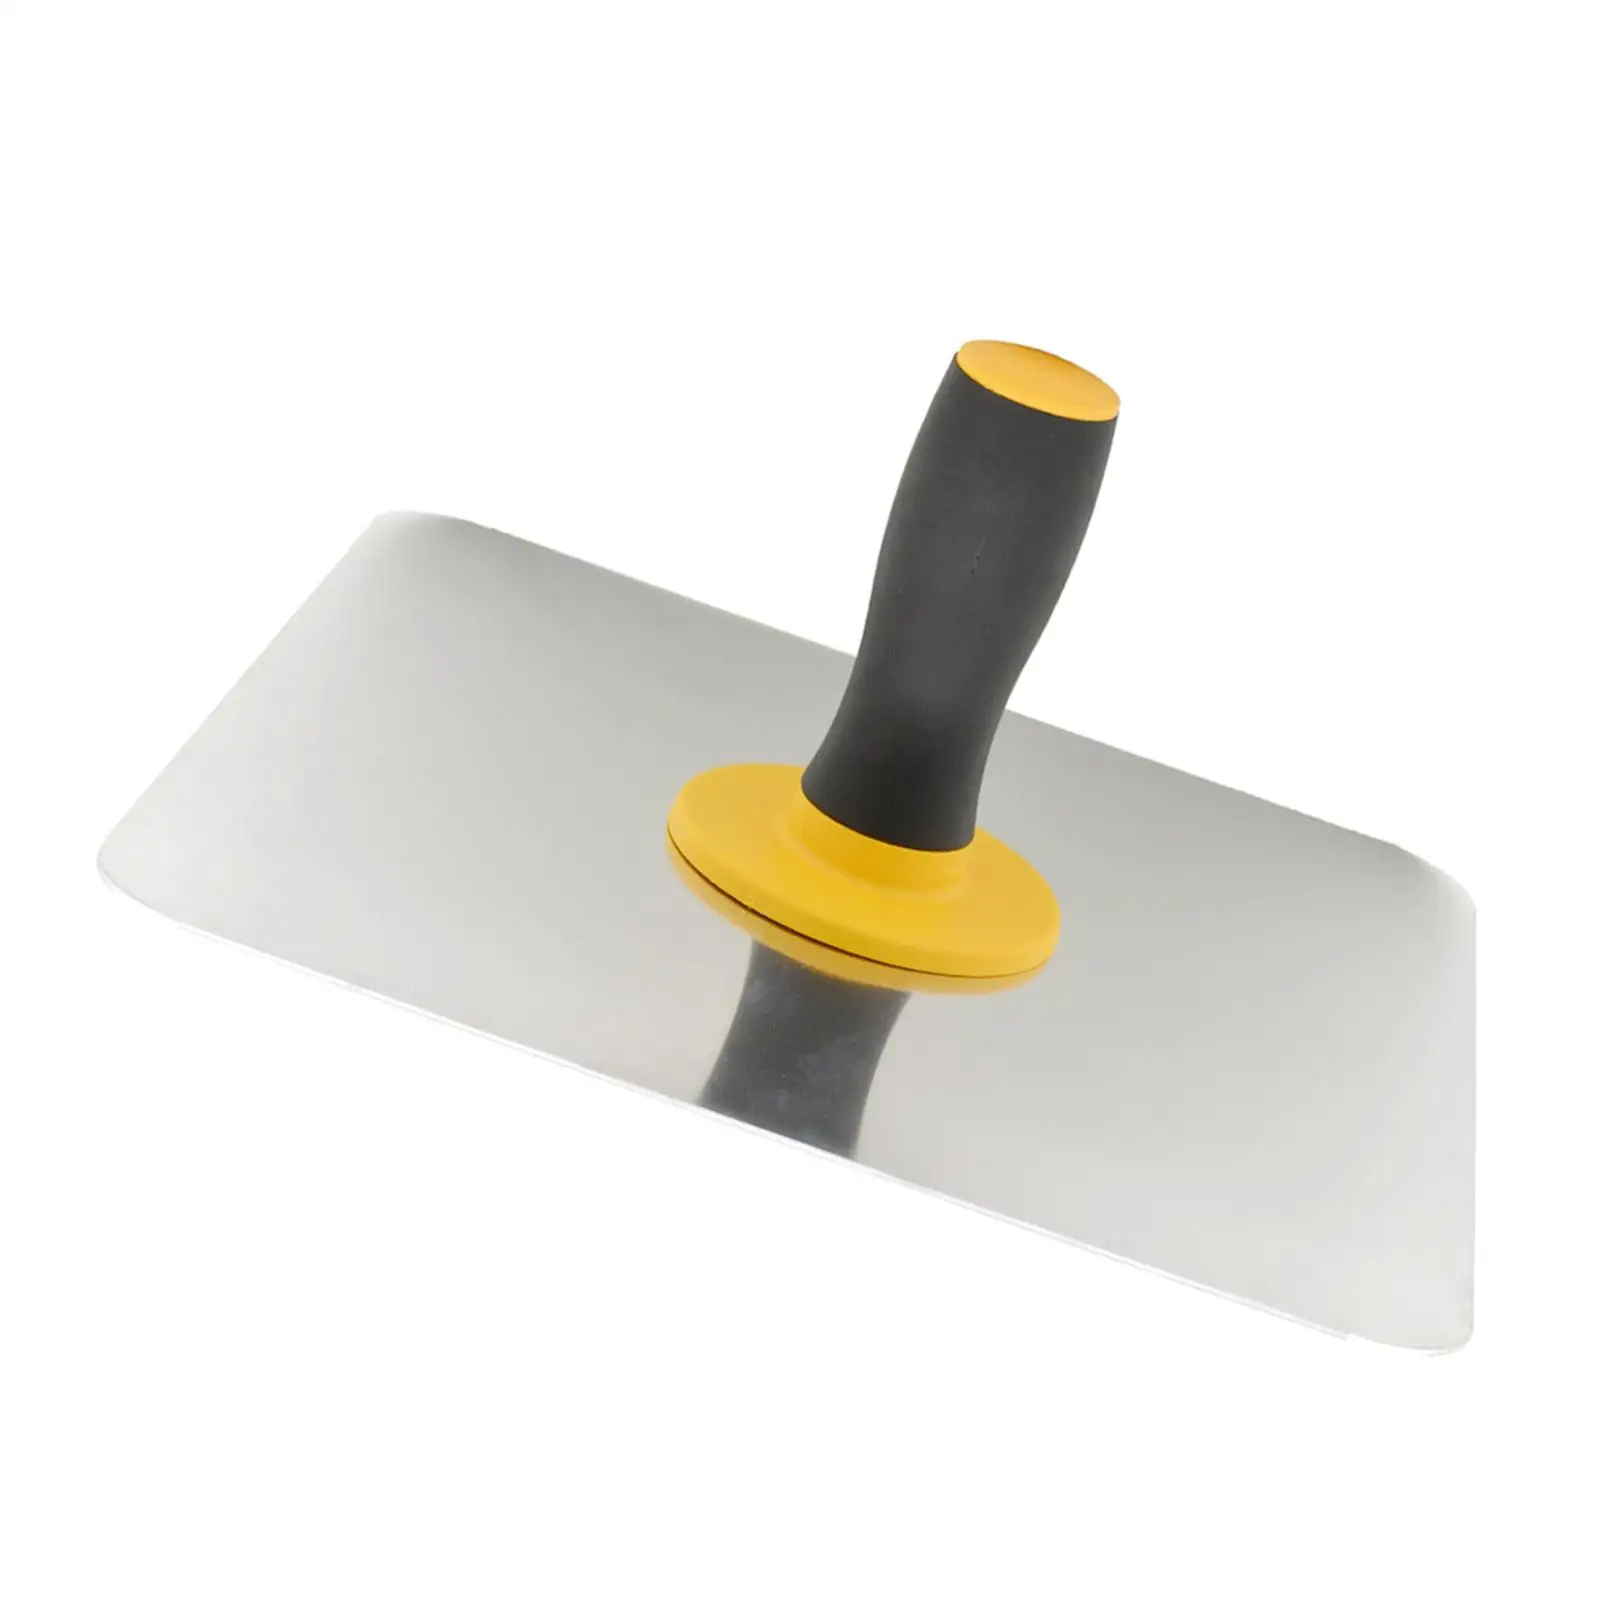 Heavy Duty Plastering Flooring Construction Tools for Home Improvement